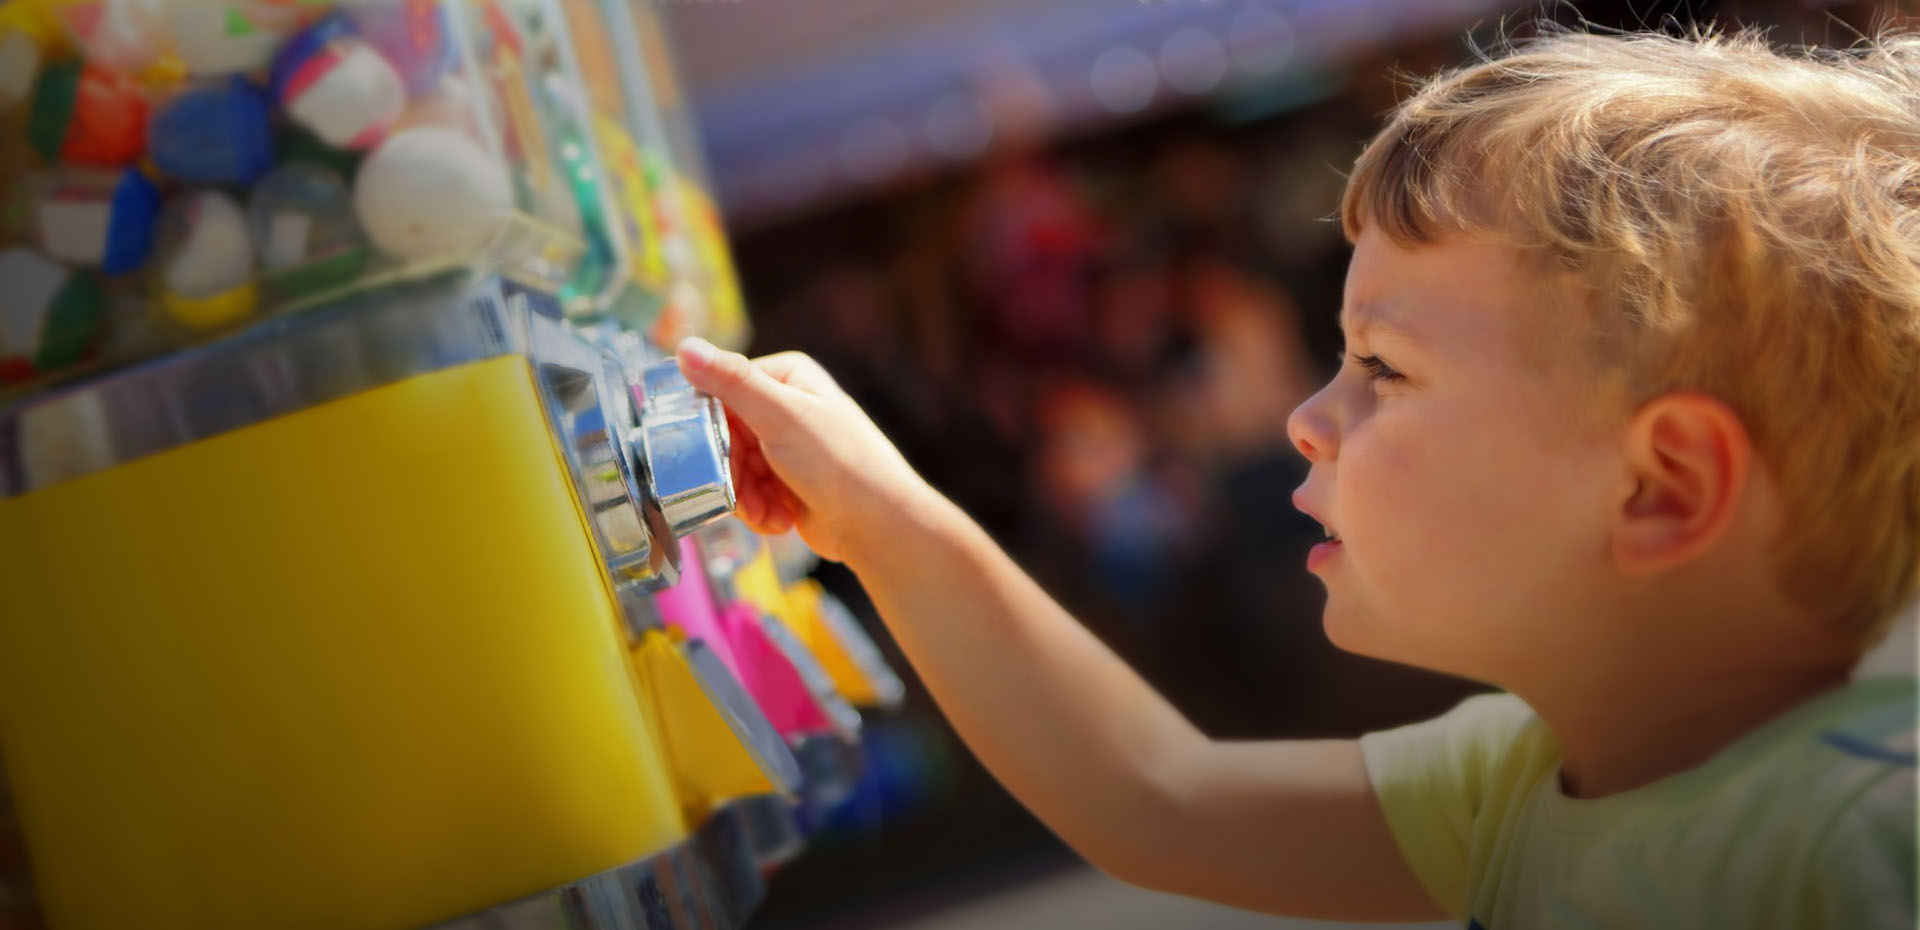 Energy Efficient Toys Vending Machines For Shopping Centres Loughbrough